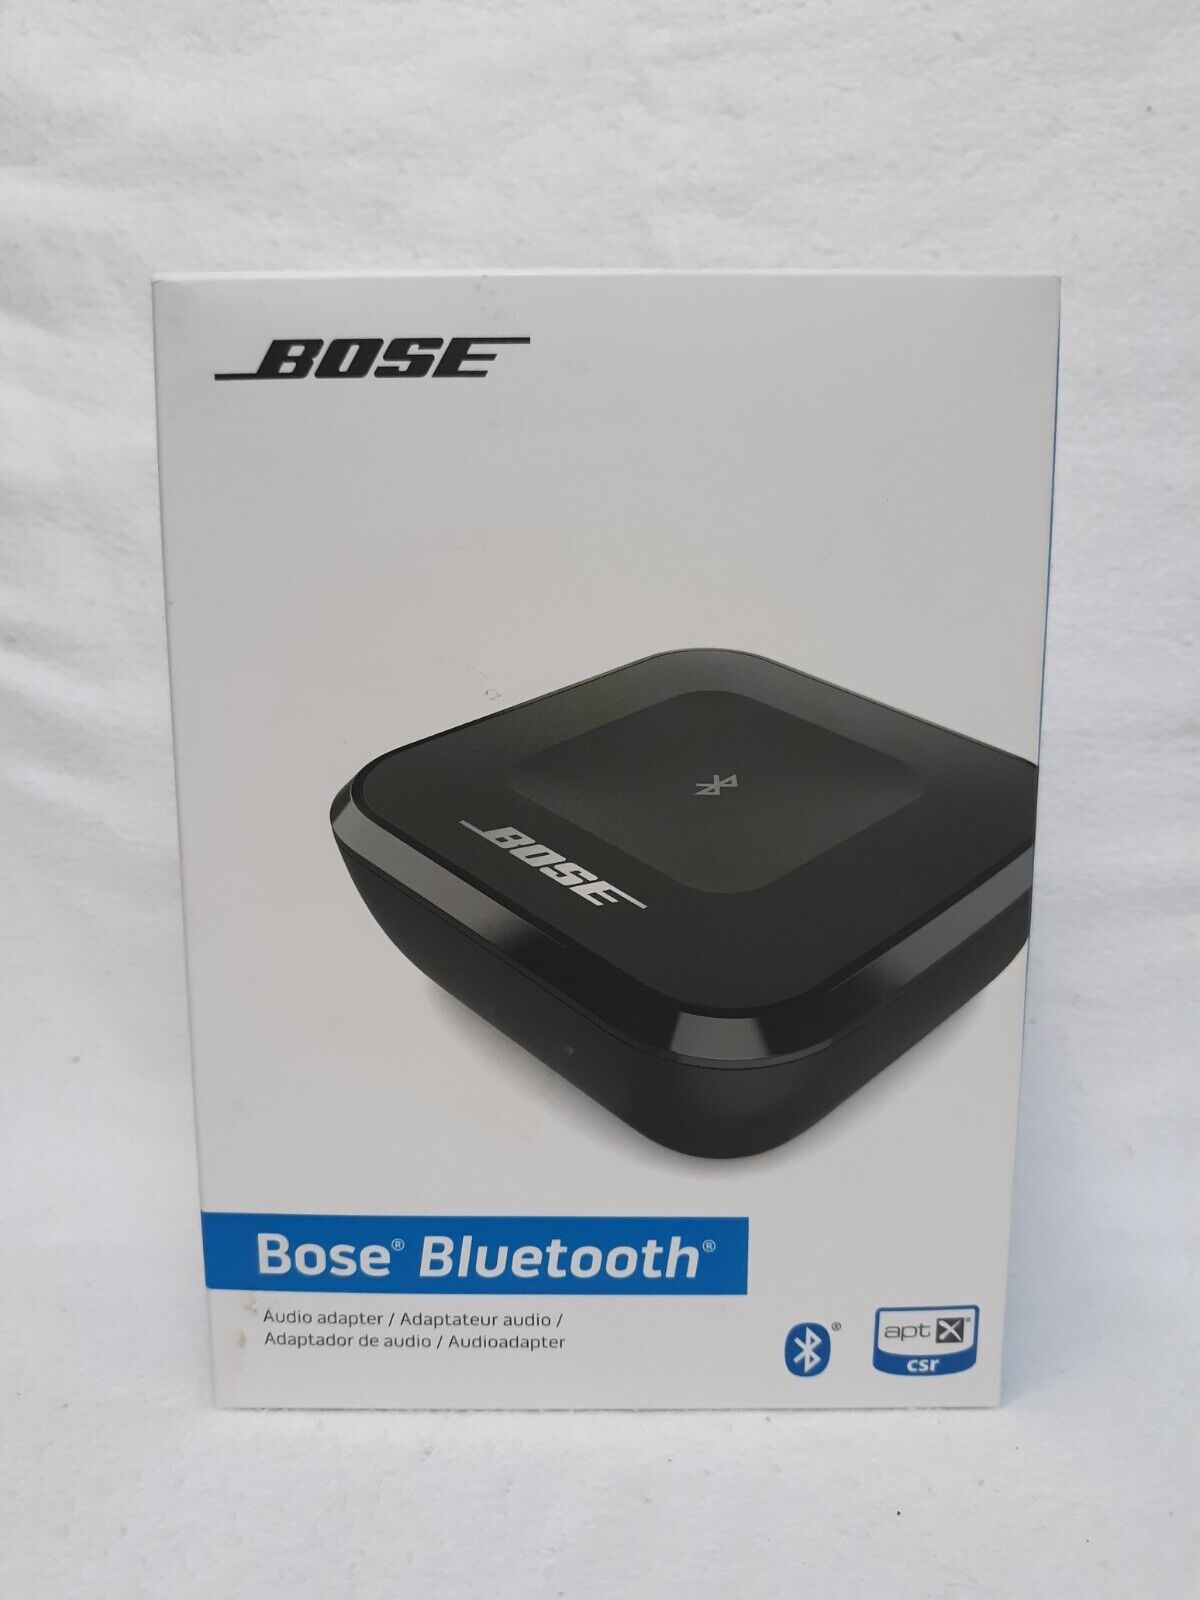 Bose Bluetooth Audio Adapter 727012-1300 8 Devices Black Stream Music Sealed